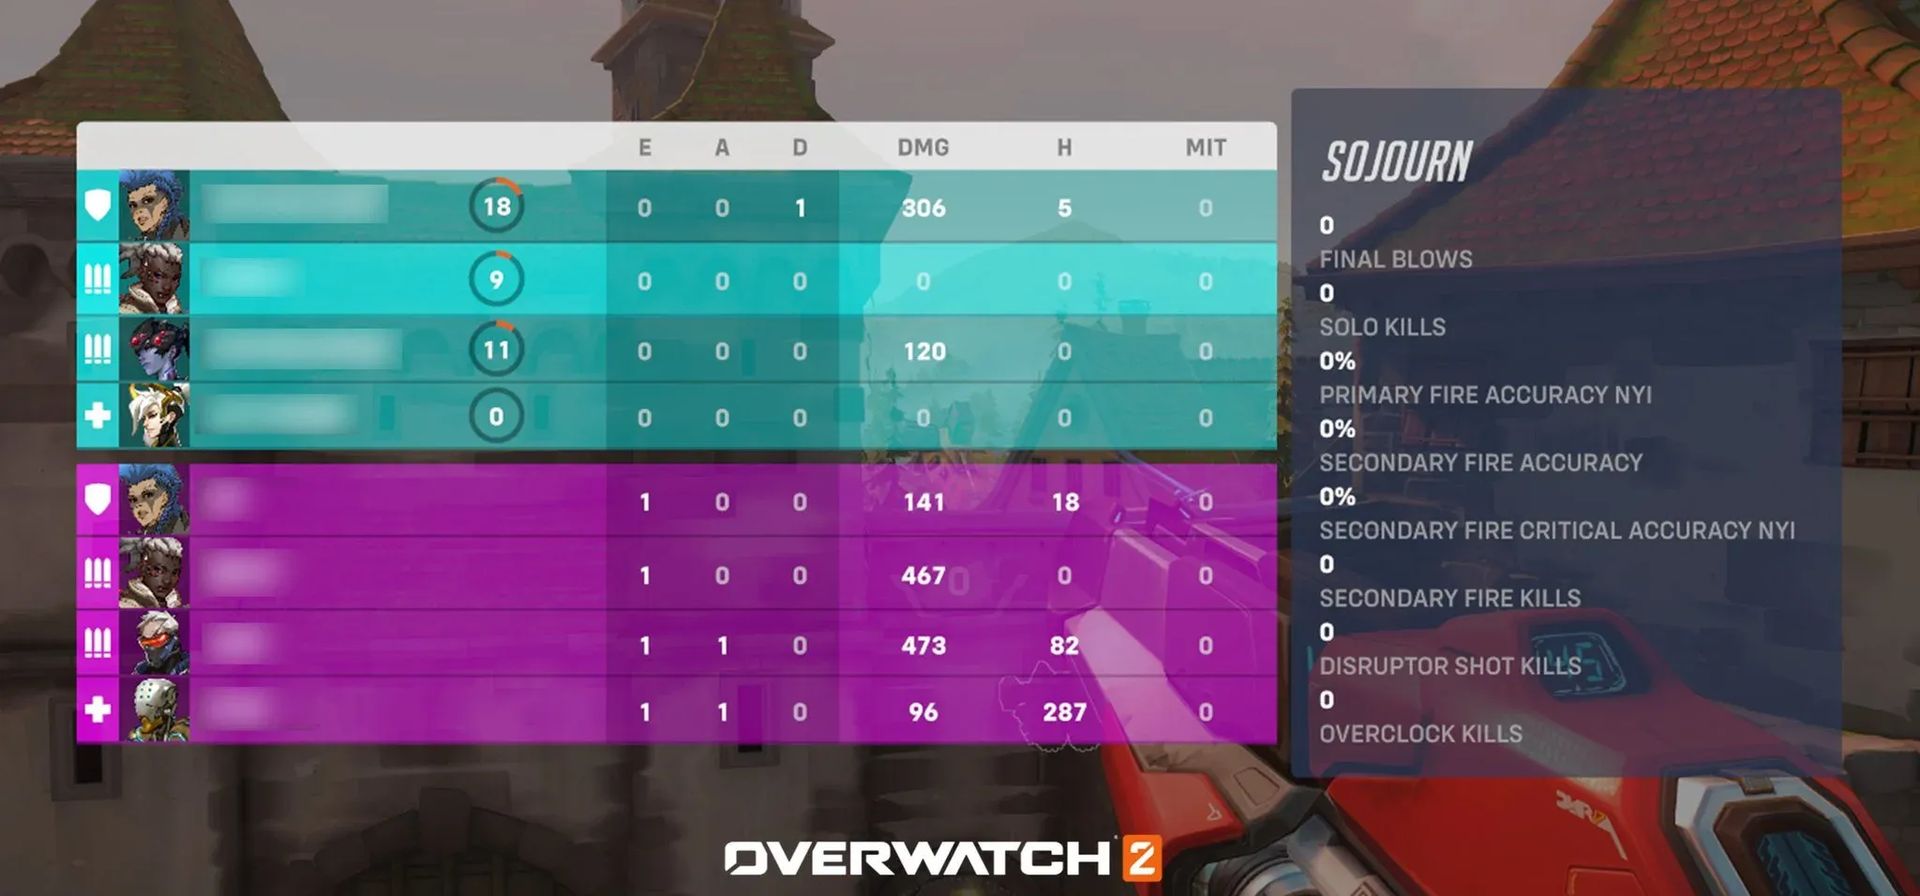 With changes to the Overwatch 2 scoreboard, many are asking themselves what does MIT mean, so we are going to tell you Overwatch 2 MIT meaning and more.